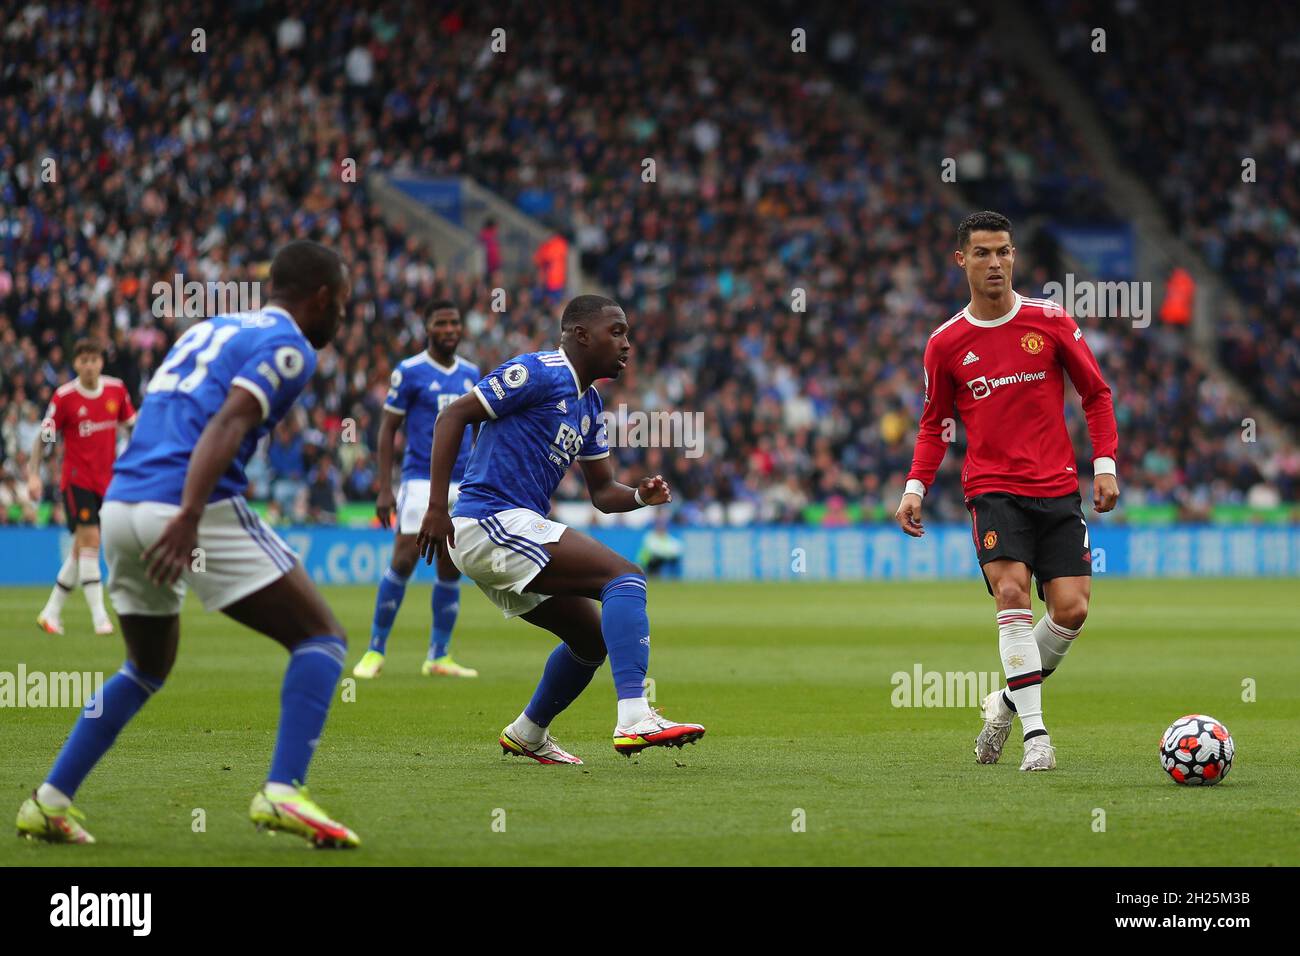 Cristiano Ronaldo of Manchester United and Boubakary Soumare of Leicester City - Leicester City v Manchester United, Premier League, King Power Stadium, Leicester, UK - 16th October 2021  Editorial Use Only - DataCo restrictions apply Stock Photo